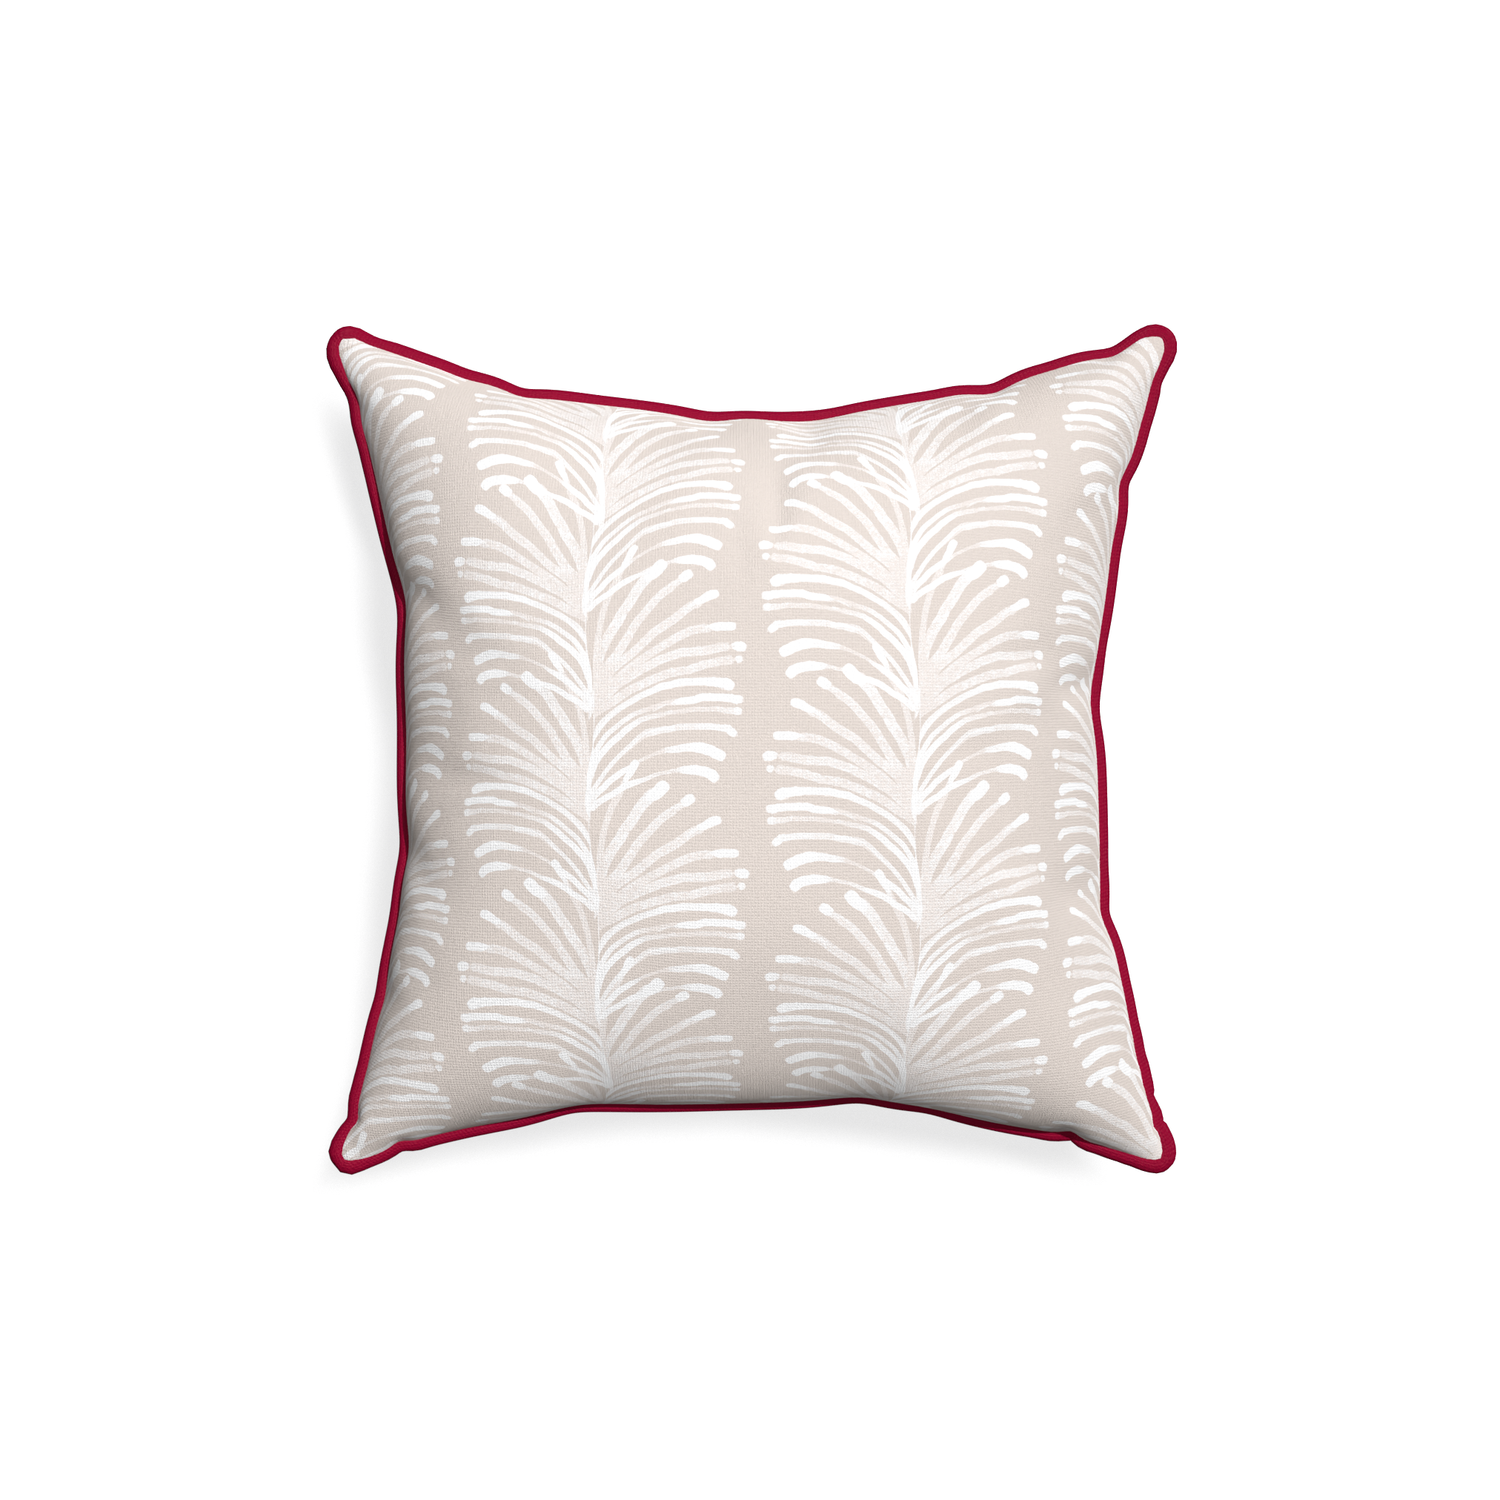 18-square emma sand custom sand colored botanical stripepillow with raspberry piping on white background